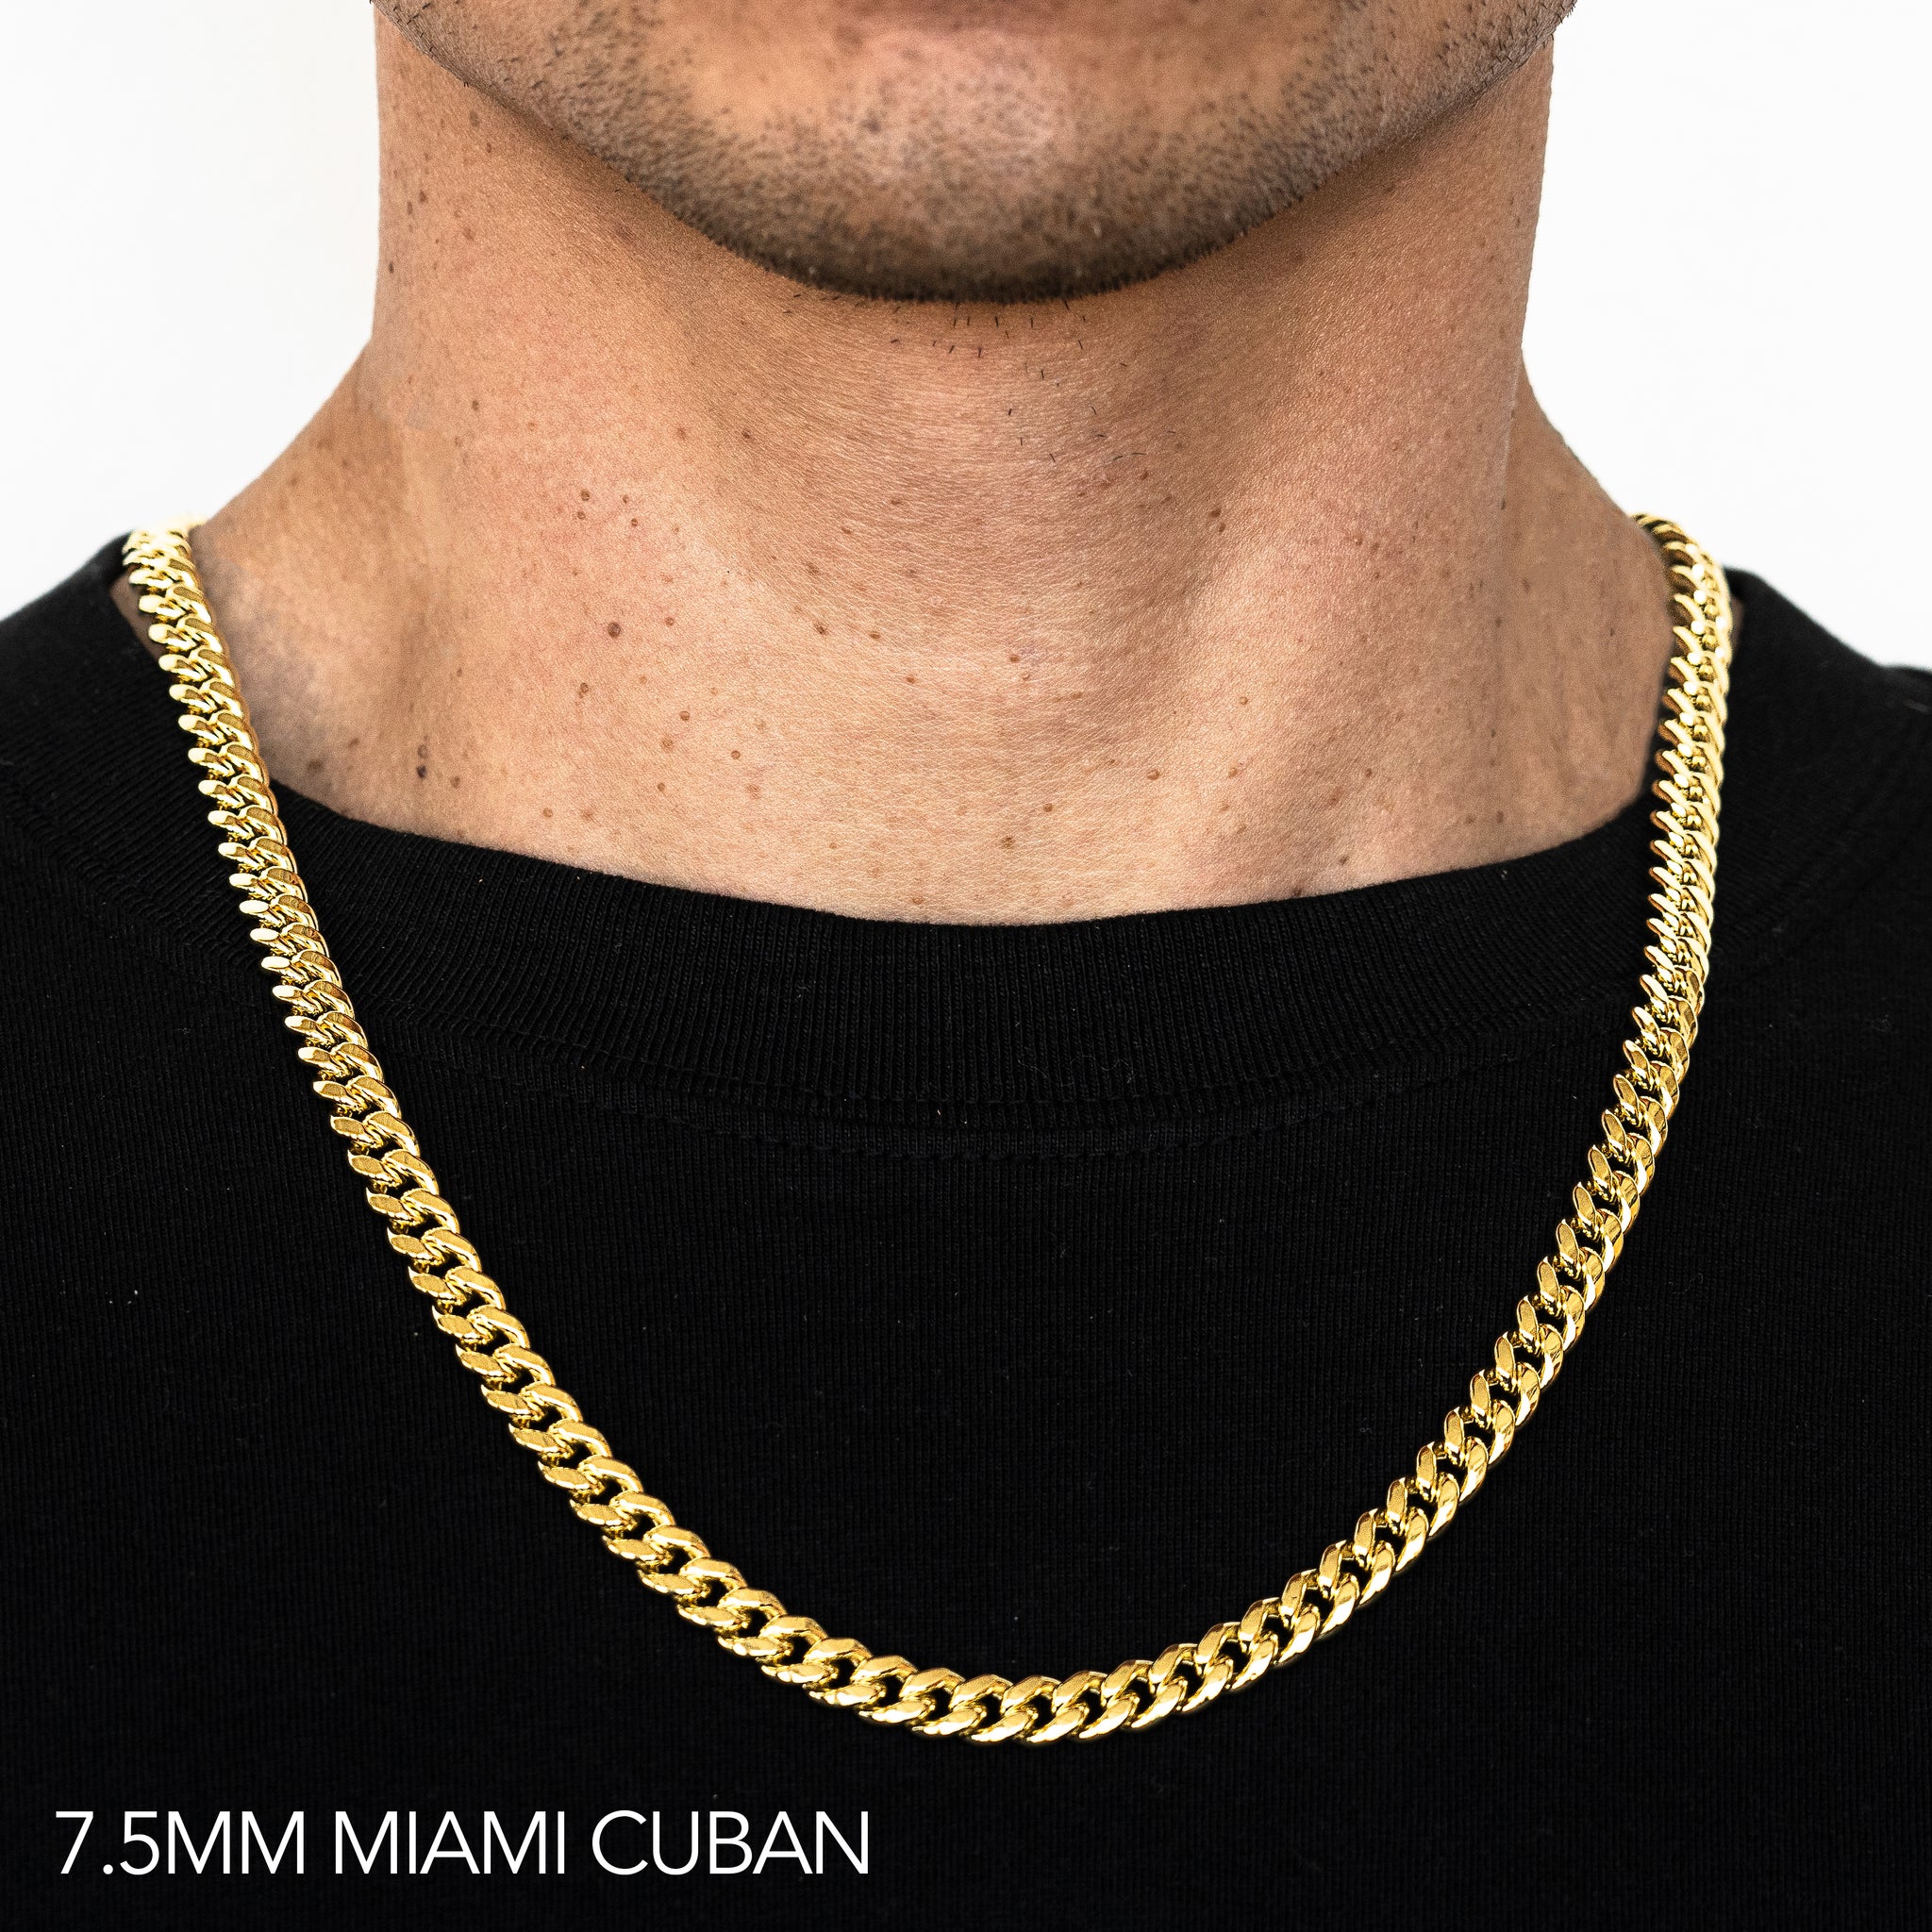 14K 7.5MM YELLOW GOLD HOLLOW MIAMI CUBAN 28 CHAIN NECKLACE"